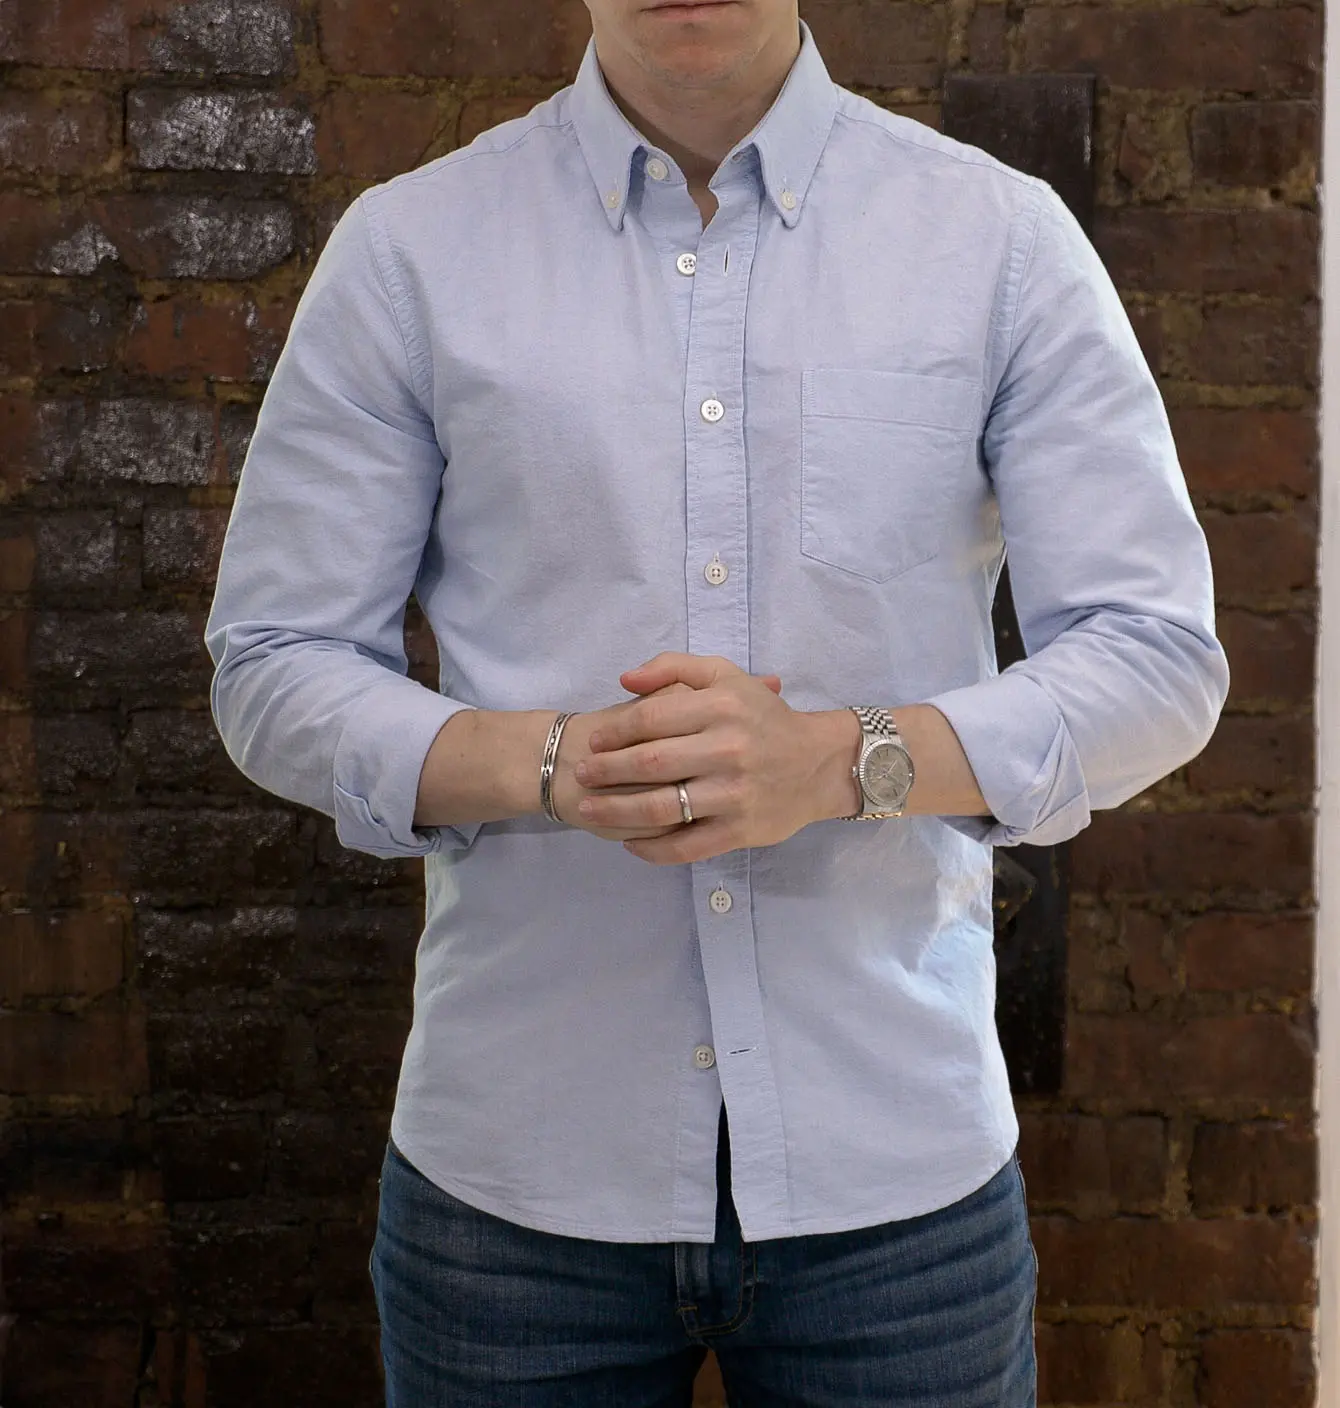 7 Ways to Roll Your Shirt Sleeves Up (Visual Guide) (Visual Guide)